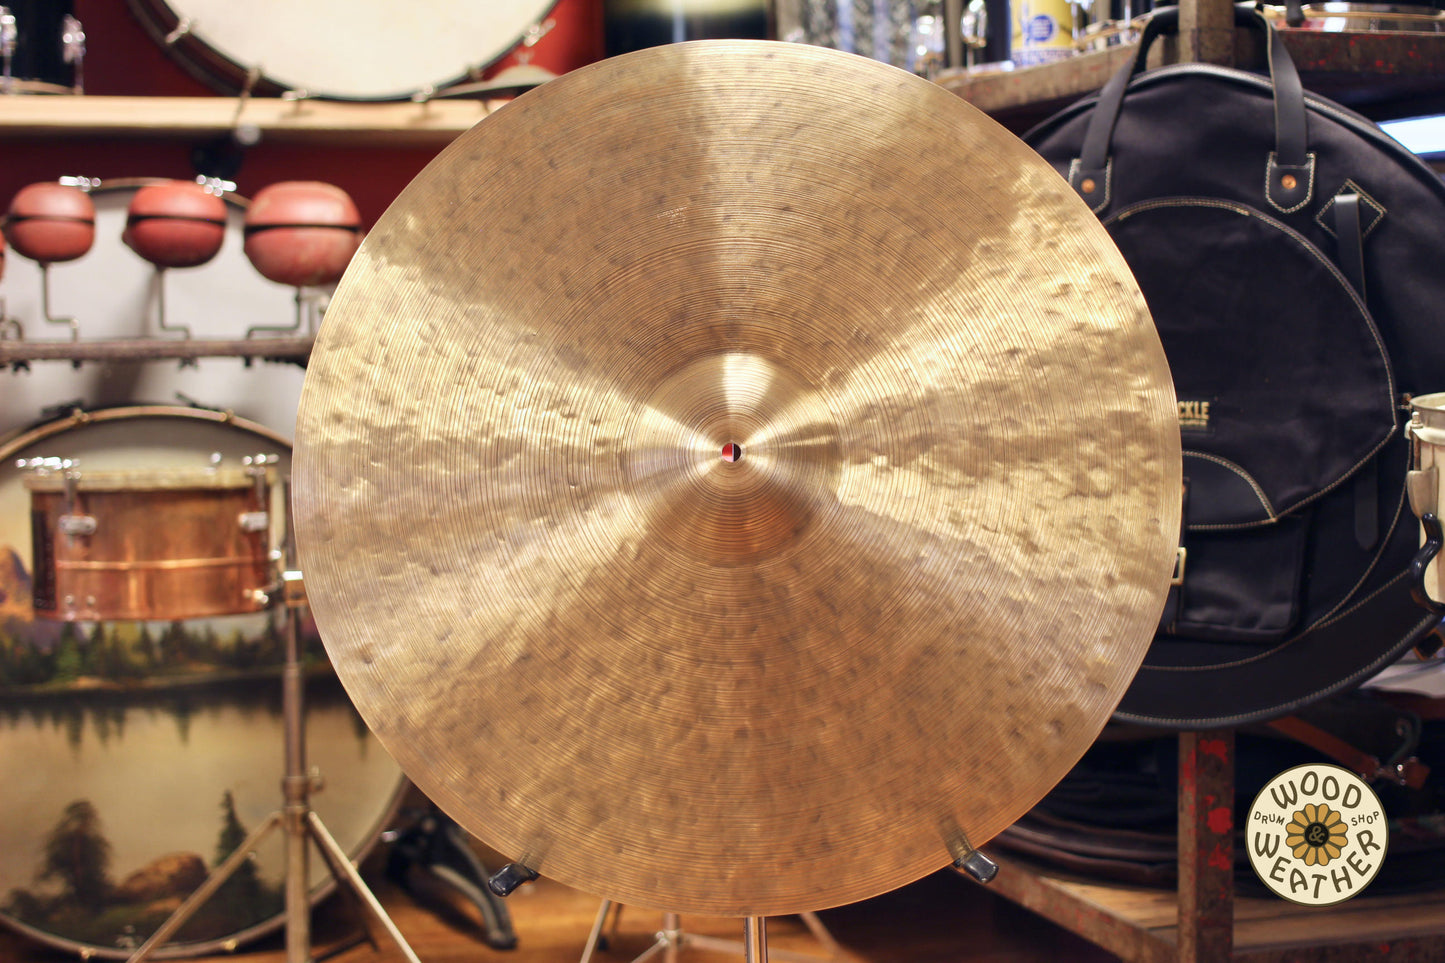 Cymbal & Gong 24" Holy Grail Ride Cymbal 2644g